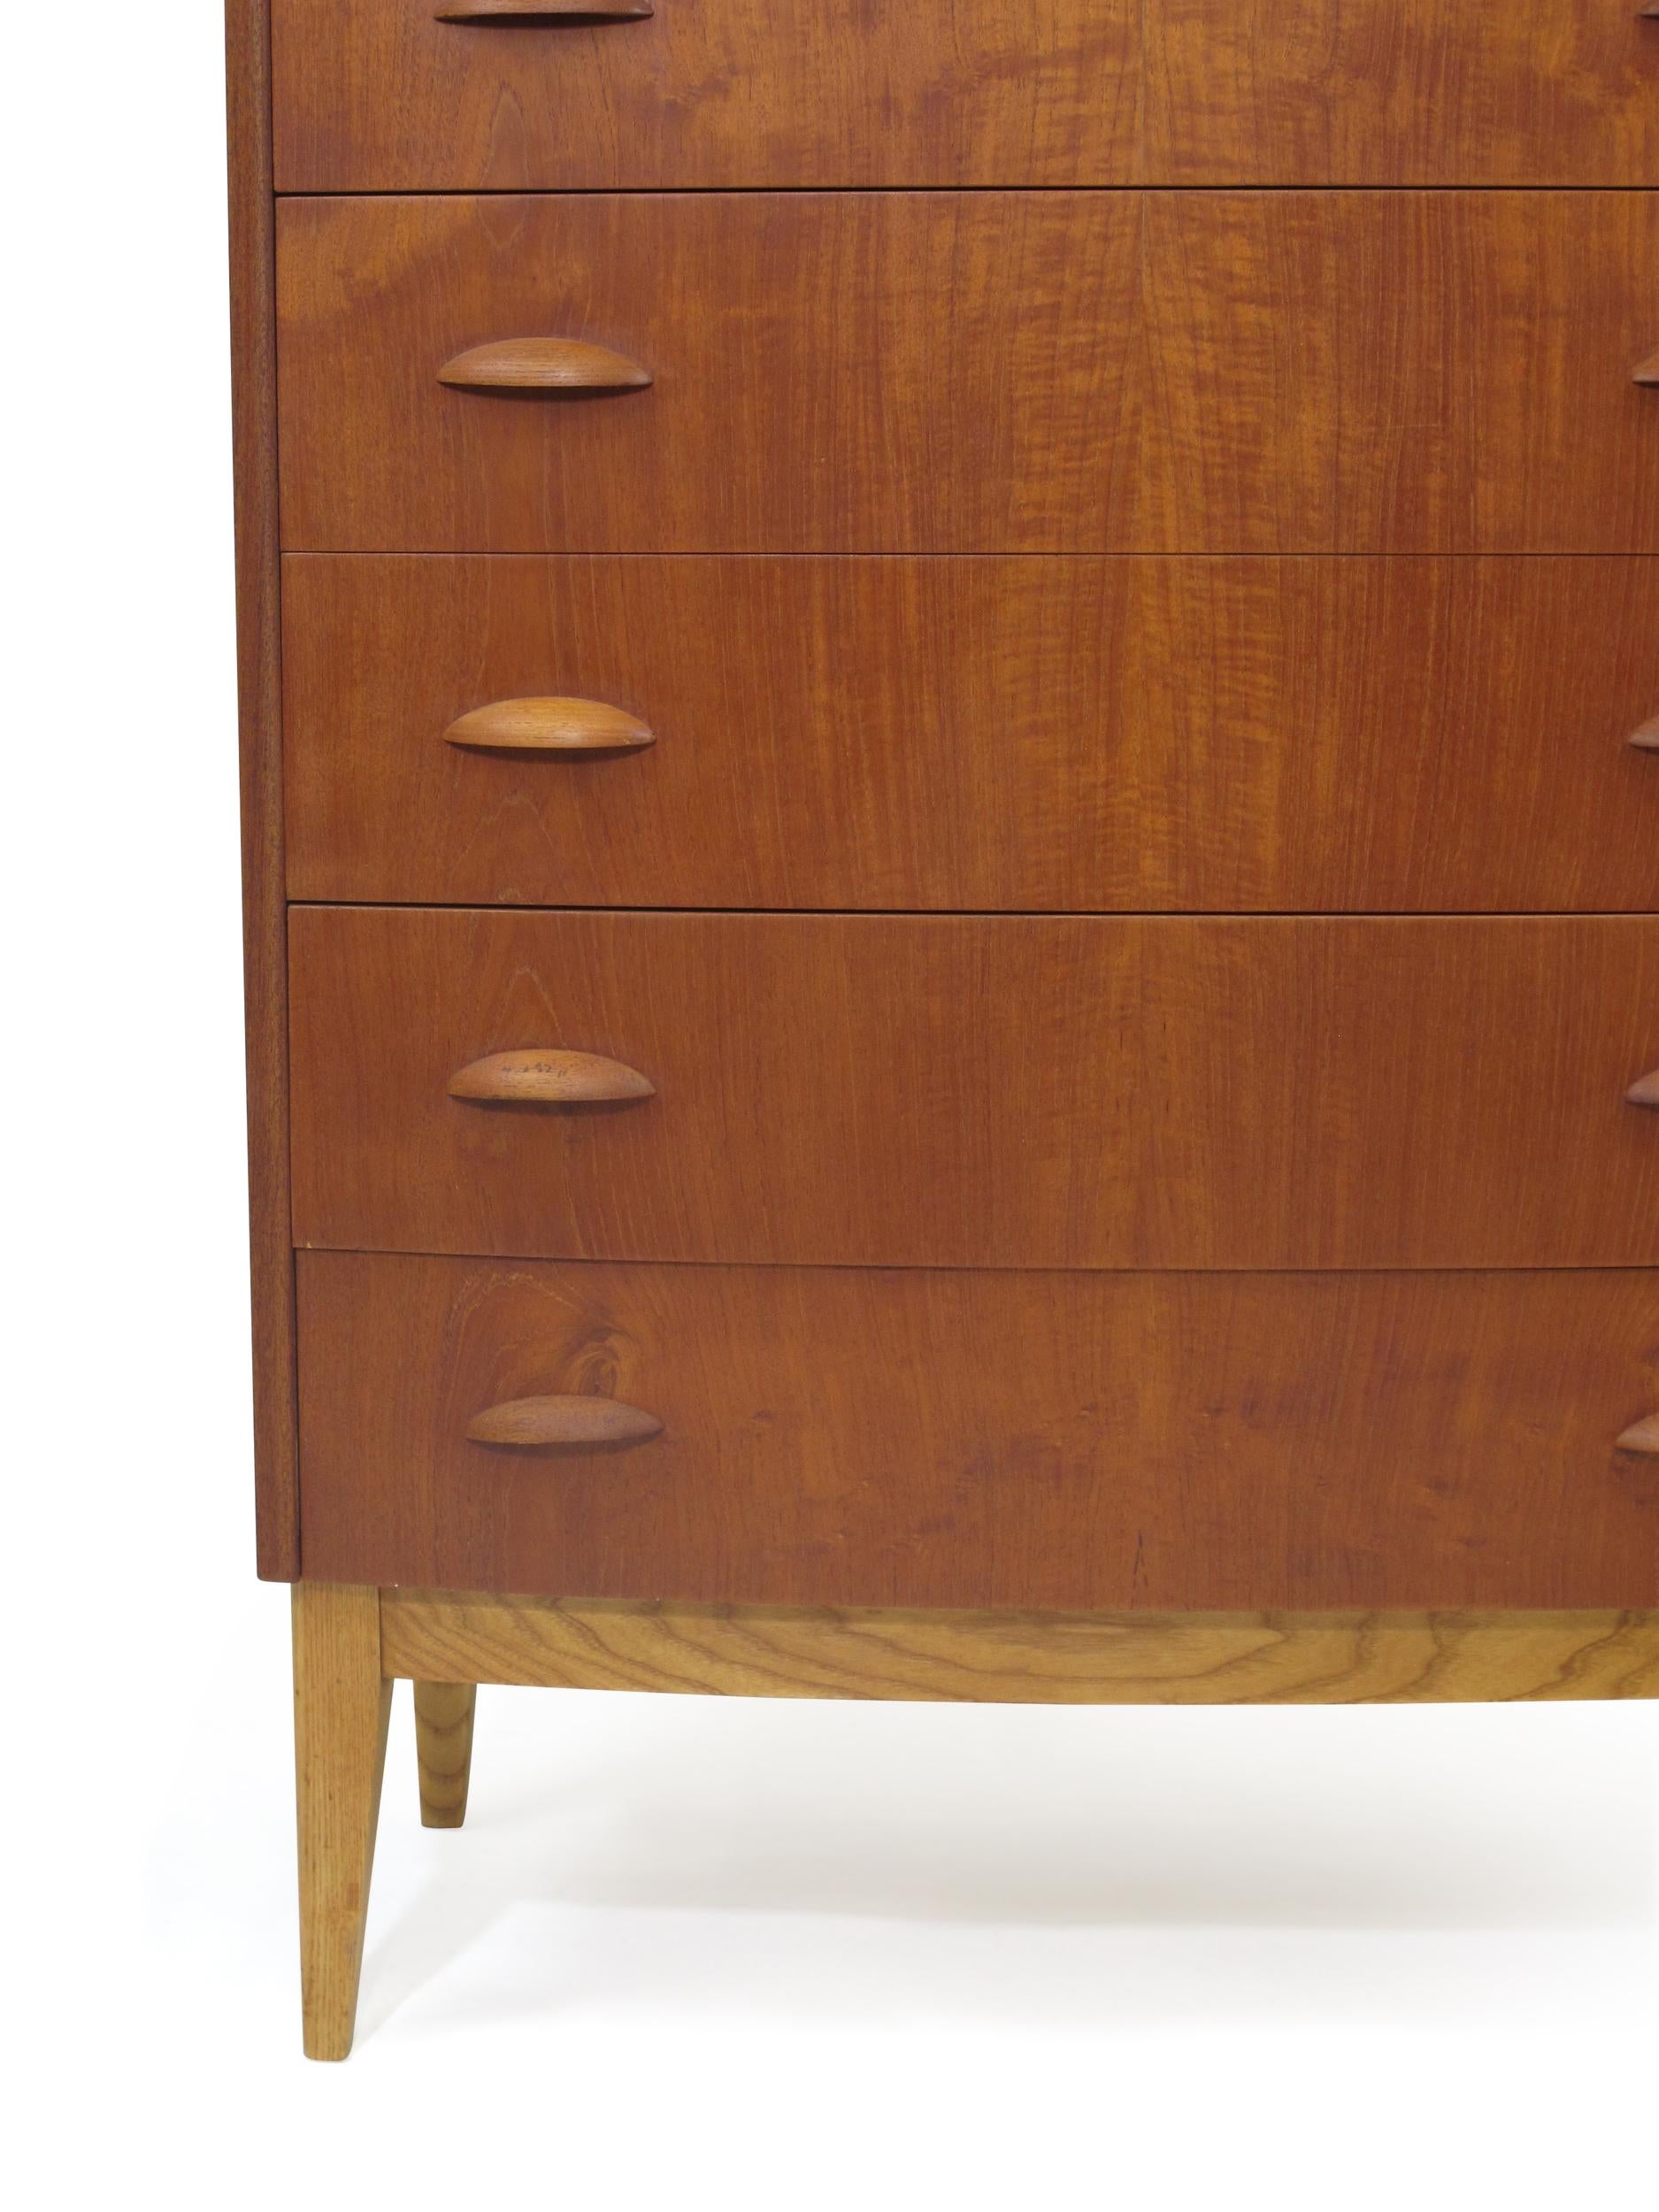 Danish six-drawer teak dresser finely crafted with a solid wood core, bow front, and sculpted pulls, raised on tapered oak legs. Finely restored with natural oil, in excellent condition.